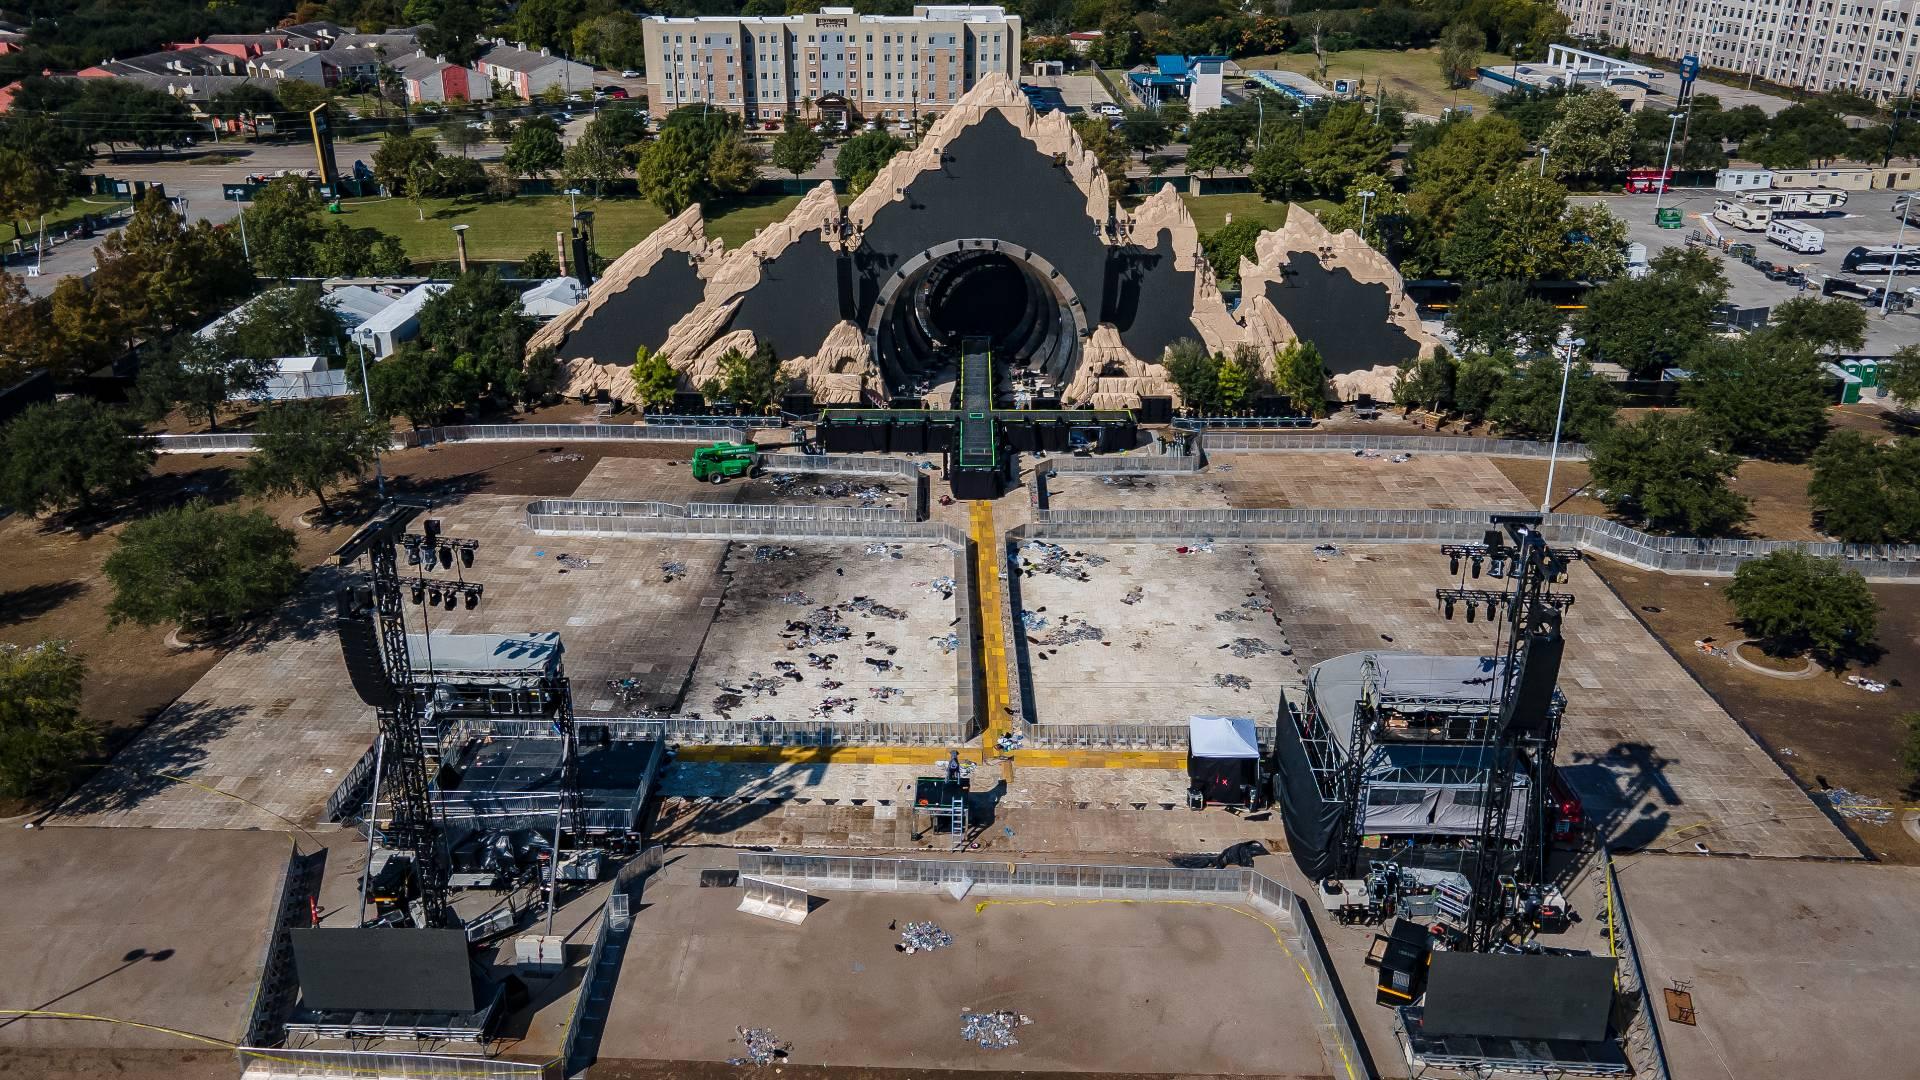 Crowd Surge Wasn’t Mentioned in Astroworld Operational Plan